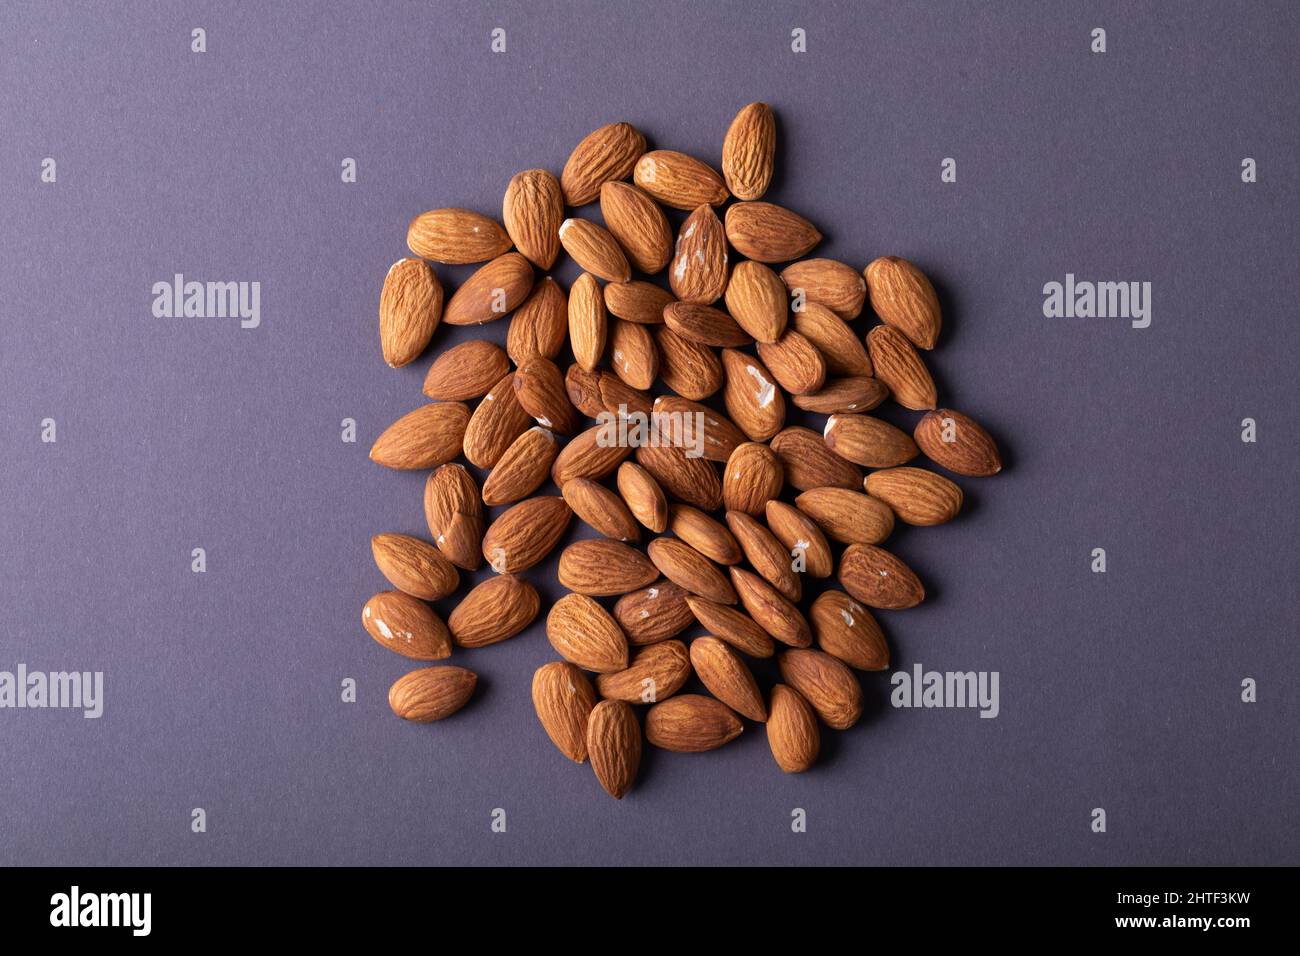 Overhead close-up shot of nutritious almonds on gray background Stock Photo